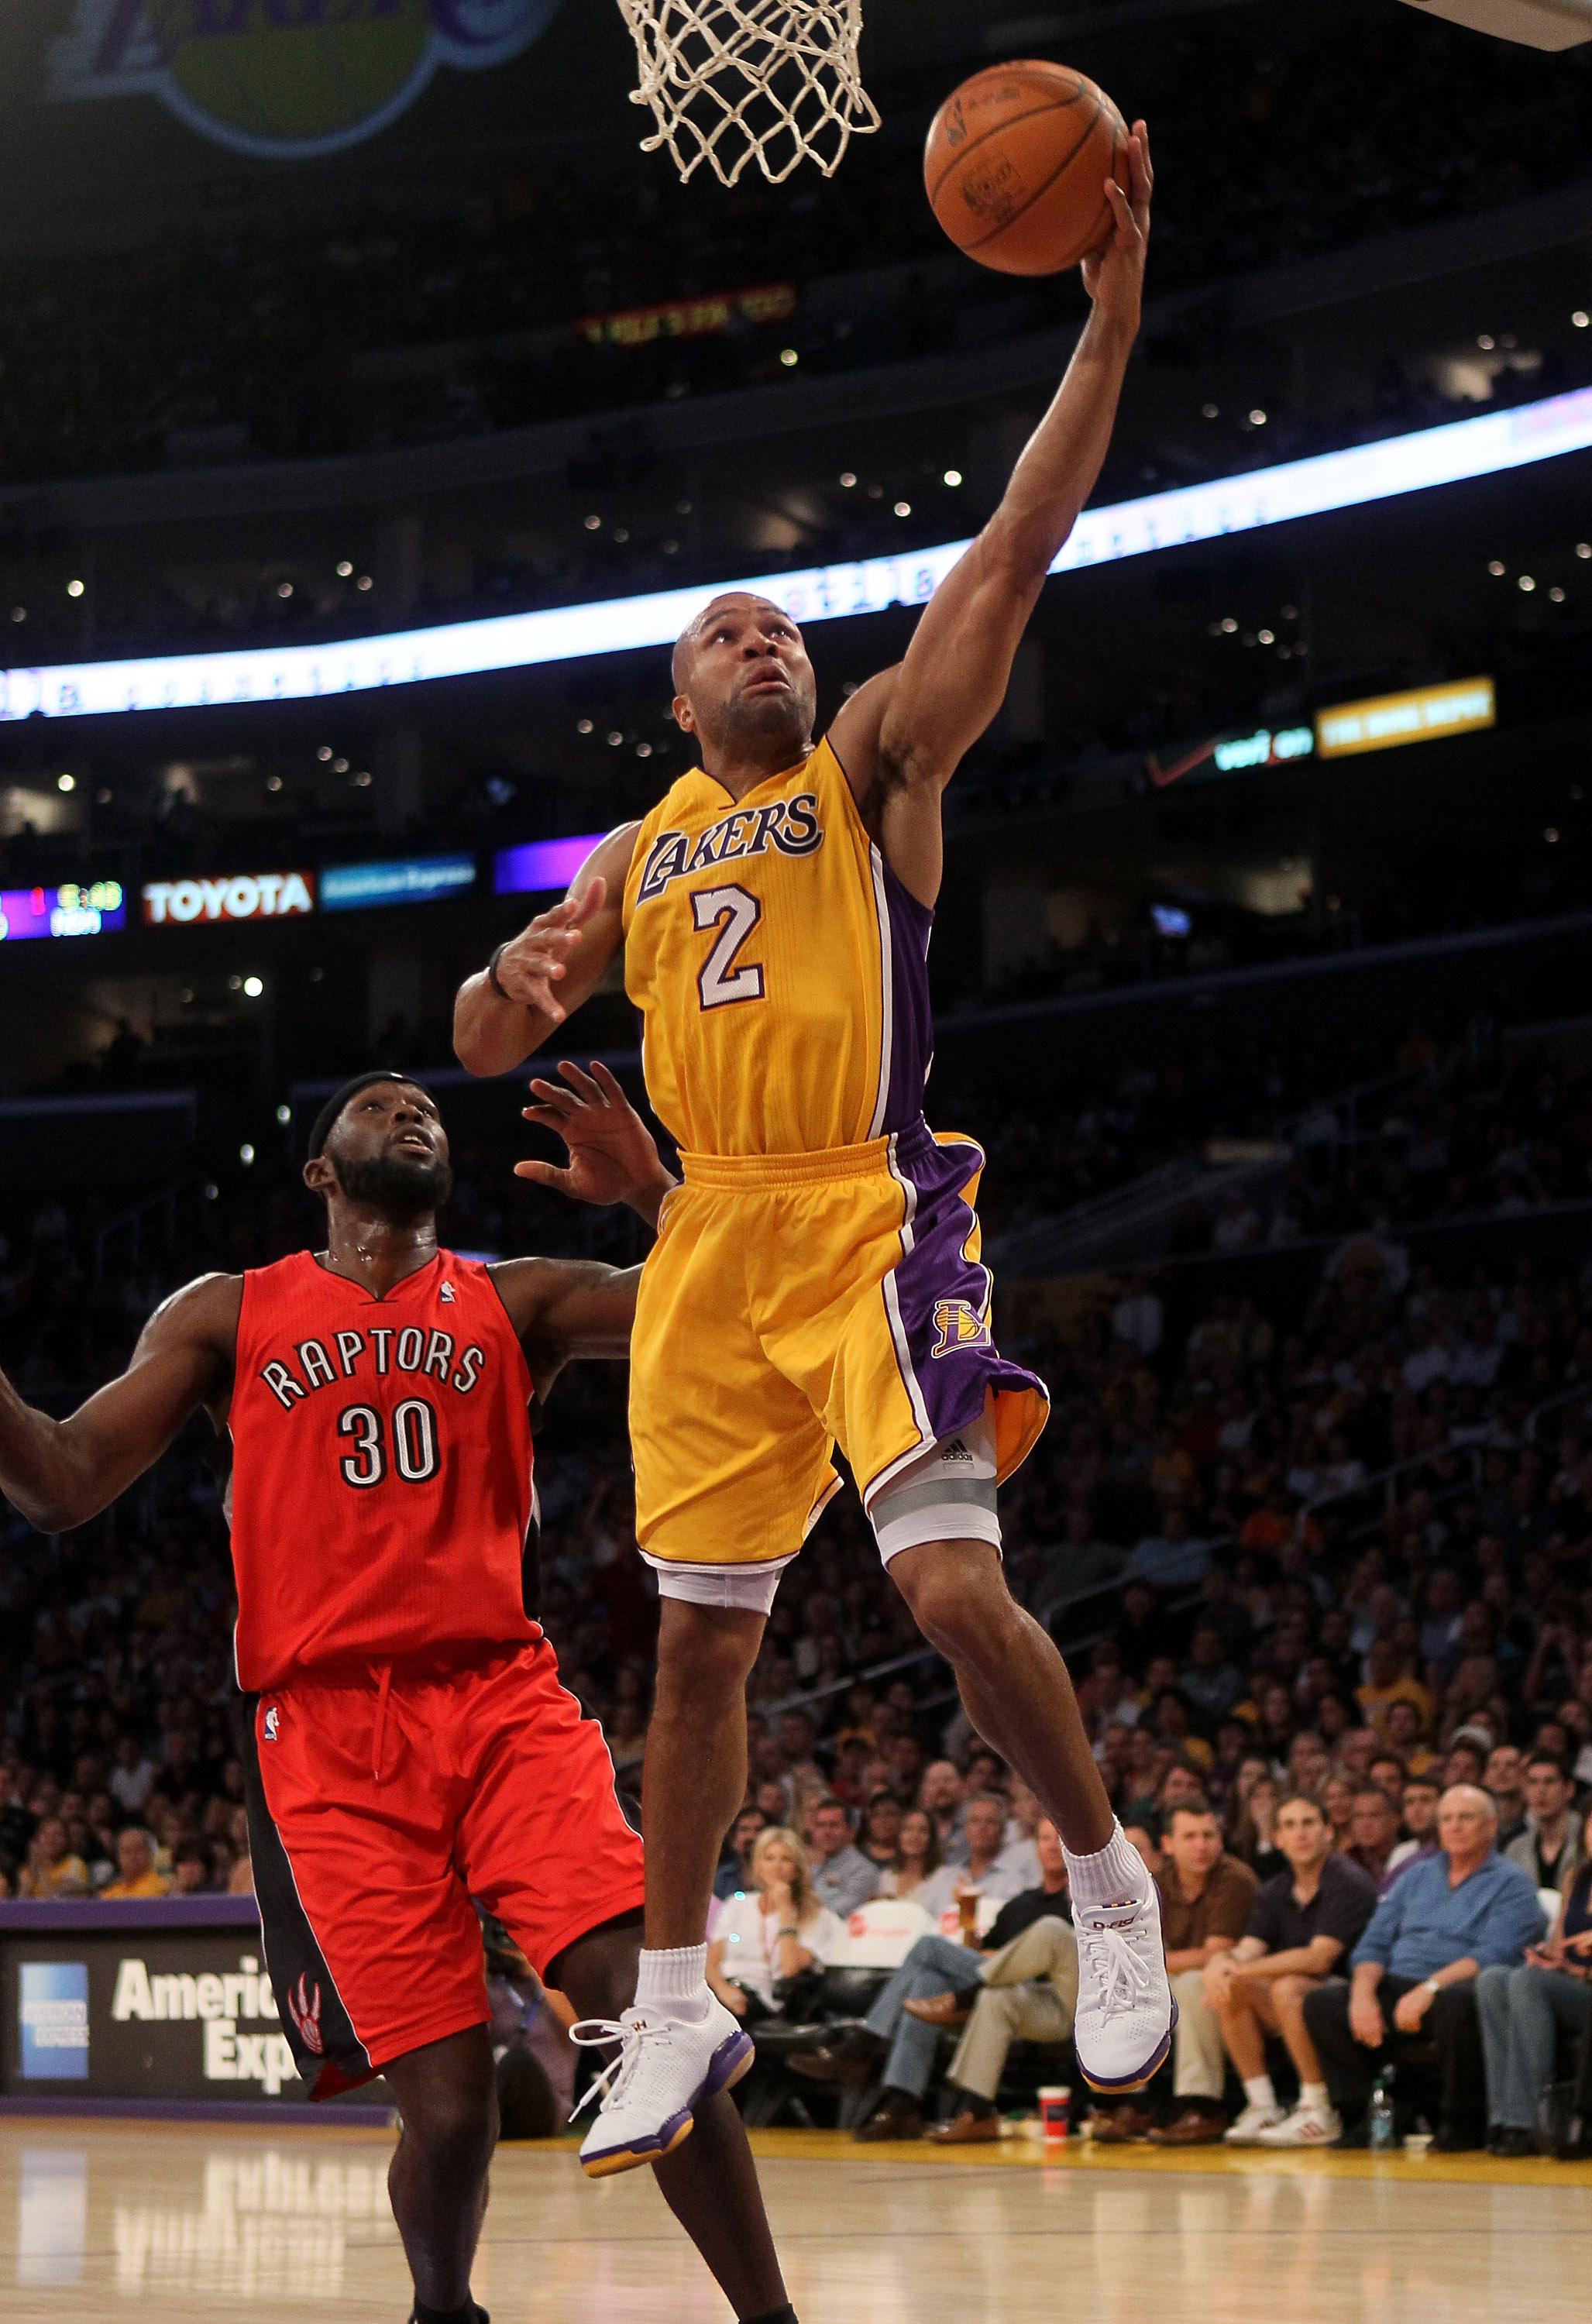 LOS ANGELES, CA - NOVEMBER 05: Derek Fisher #2  of the Los Angeles Lakers shoots over Reggie Evans #30 of the Toronto Raptors at Staples Center on November 5, 2010 in Los Angeles, California.   NOTE TO USER: User expressly acknowledges and agrees that, by